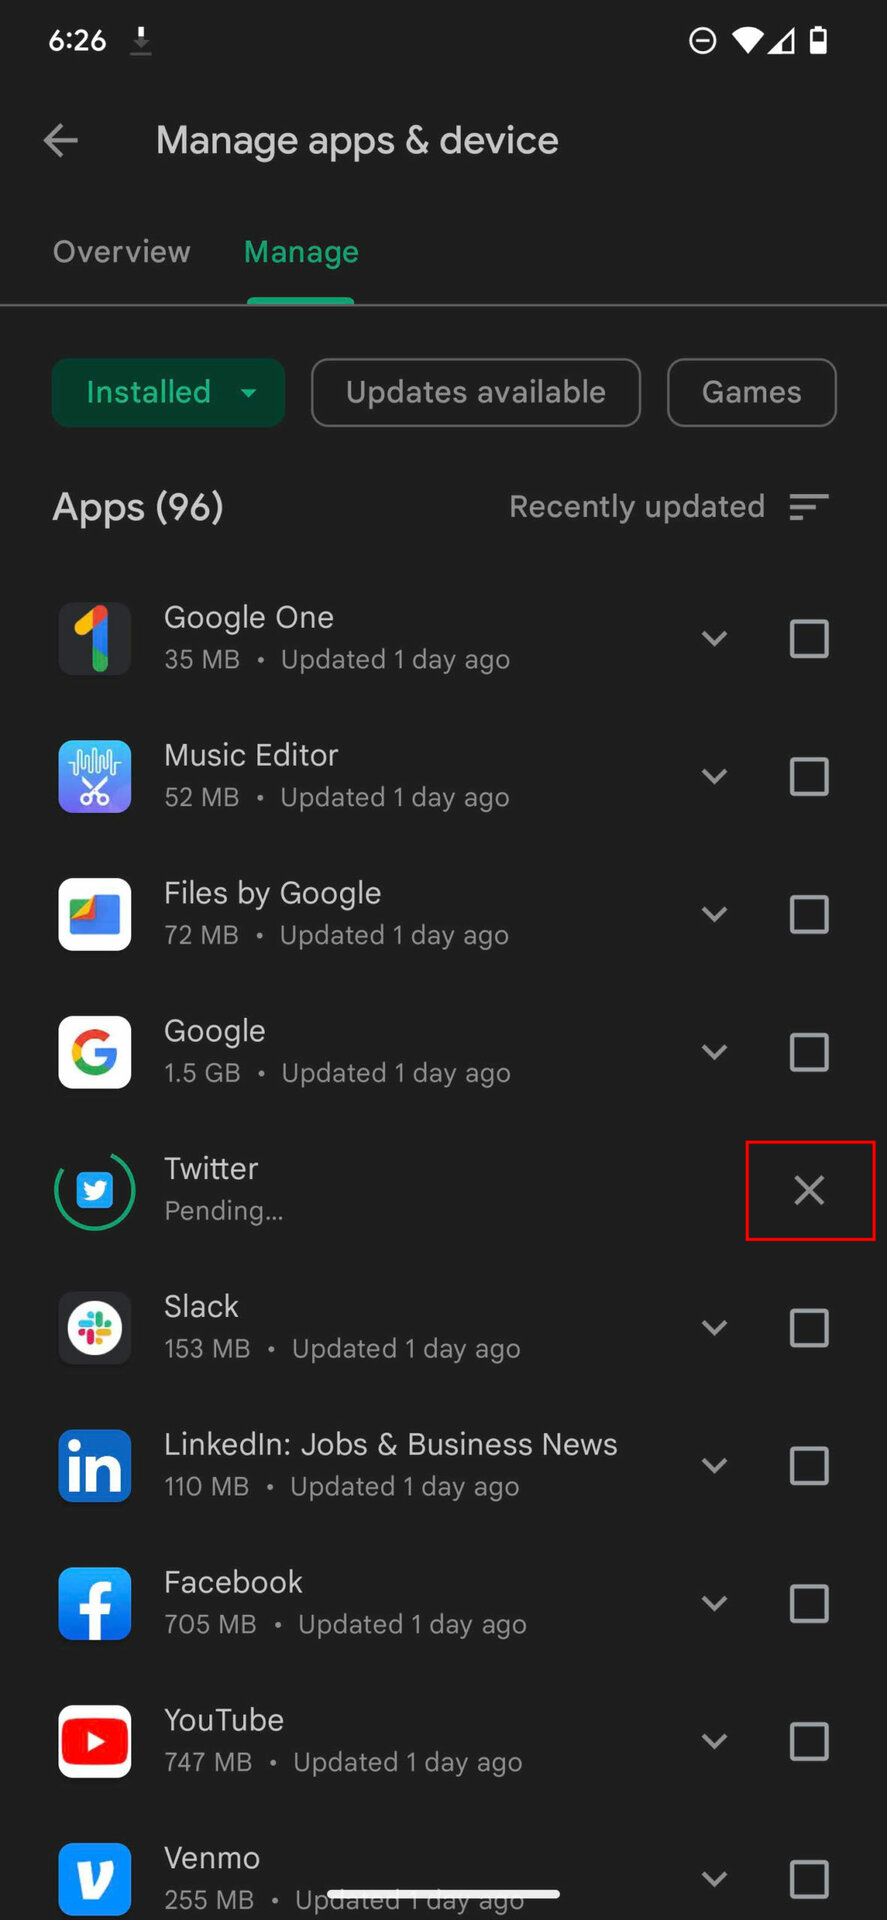 How to cancel an update or install on the Google Play Store 4